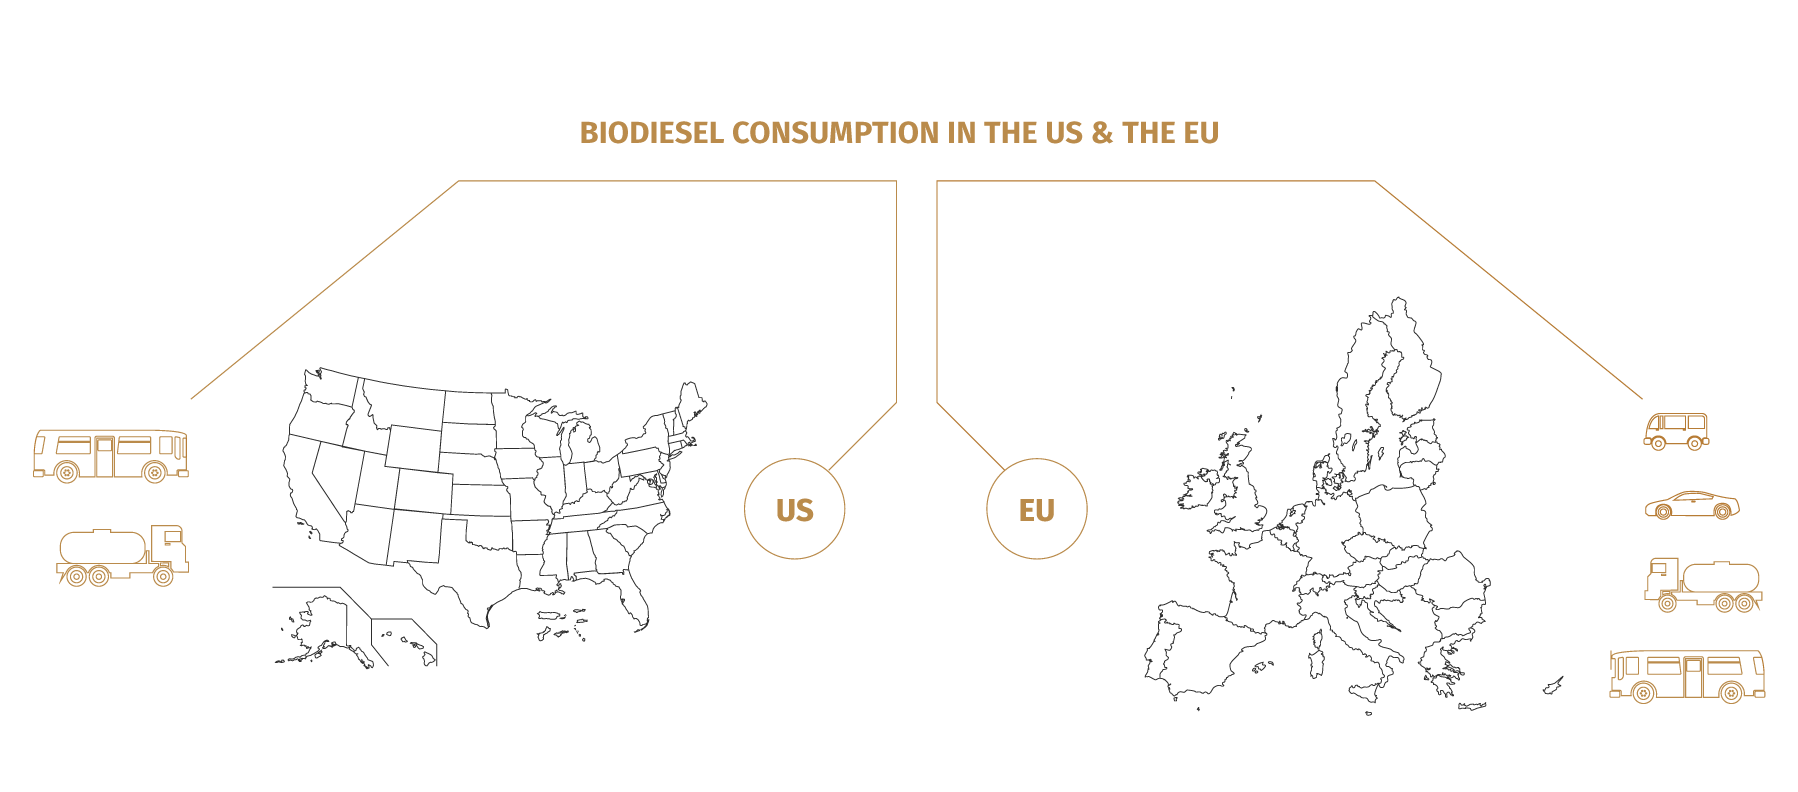 image about consumption of biodiesel in US and EU.